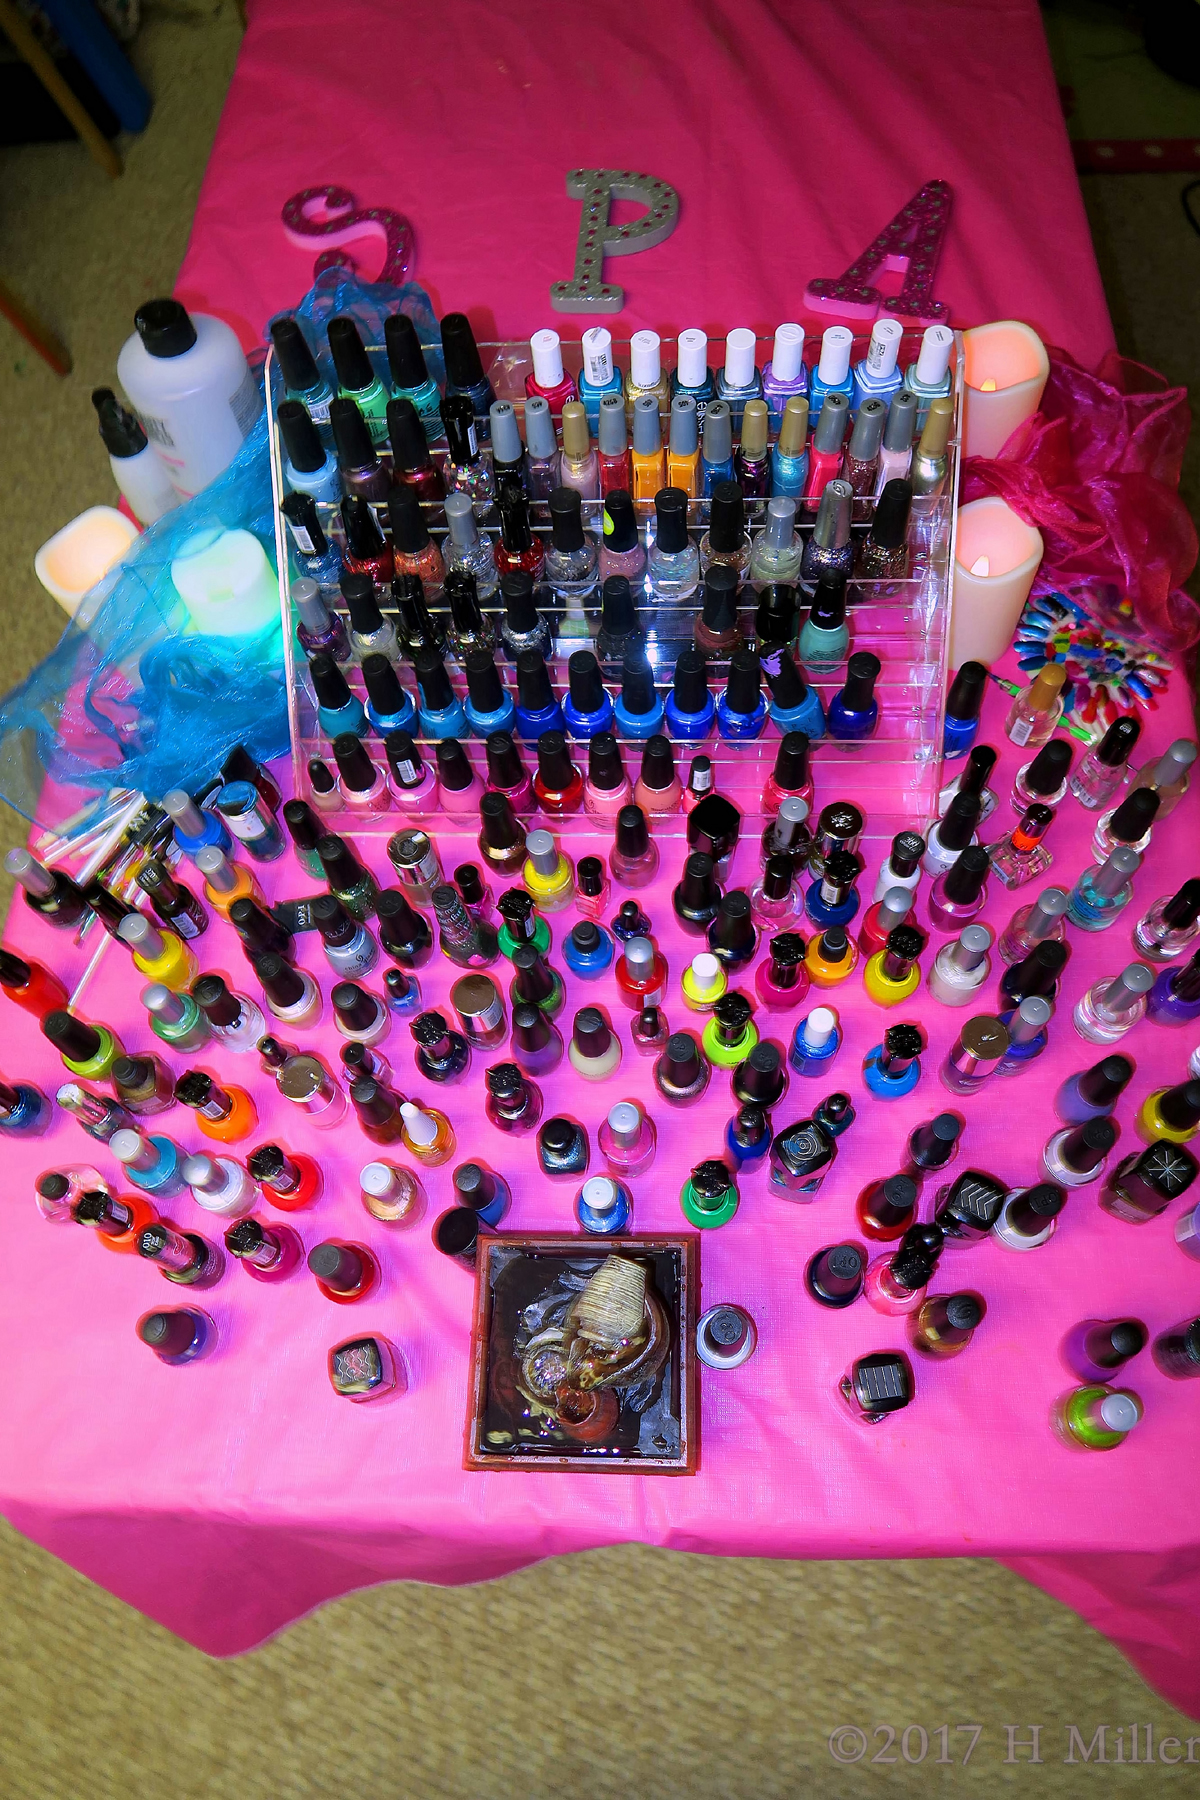 The S P A Letters And Nail Polish Set Up!